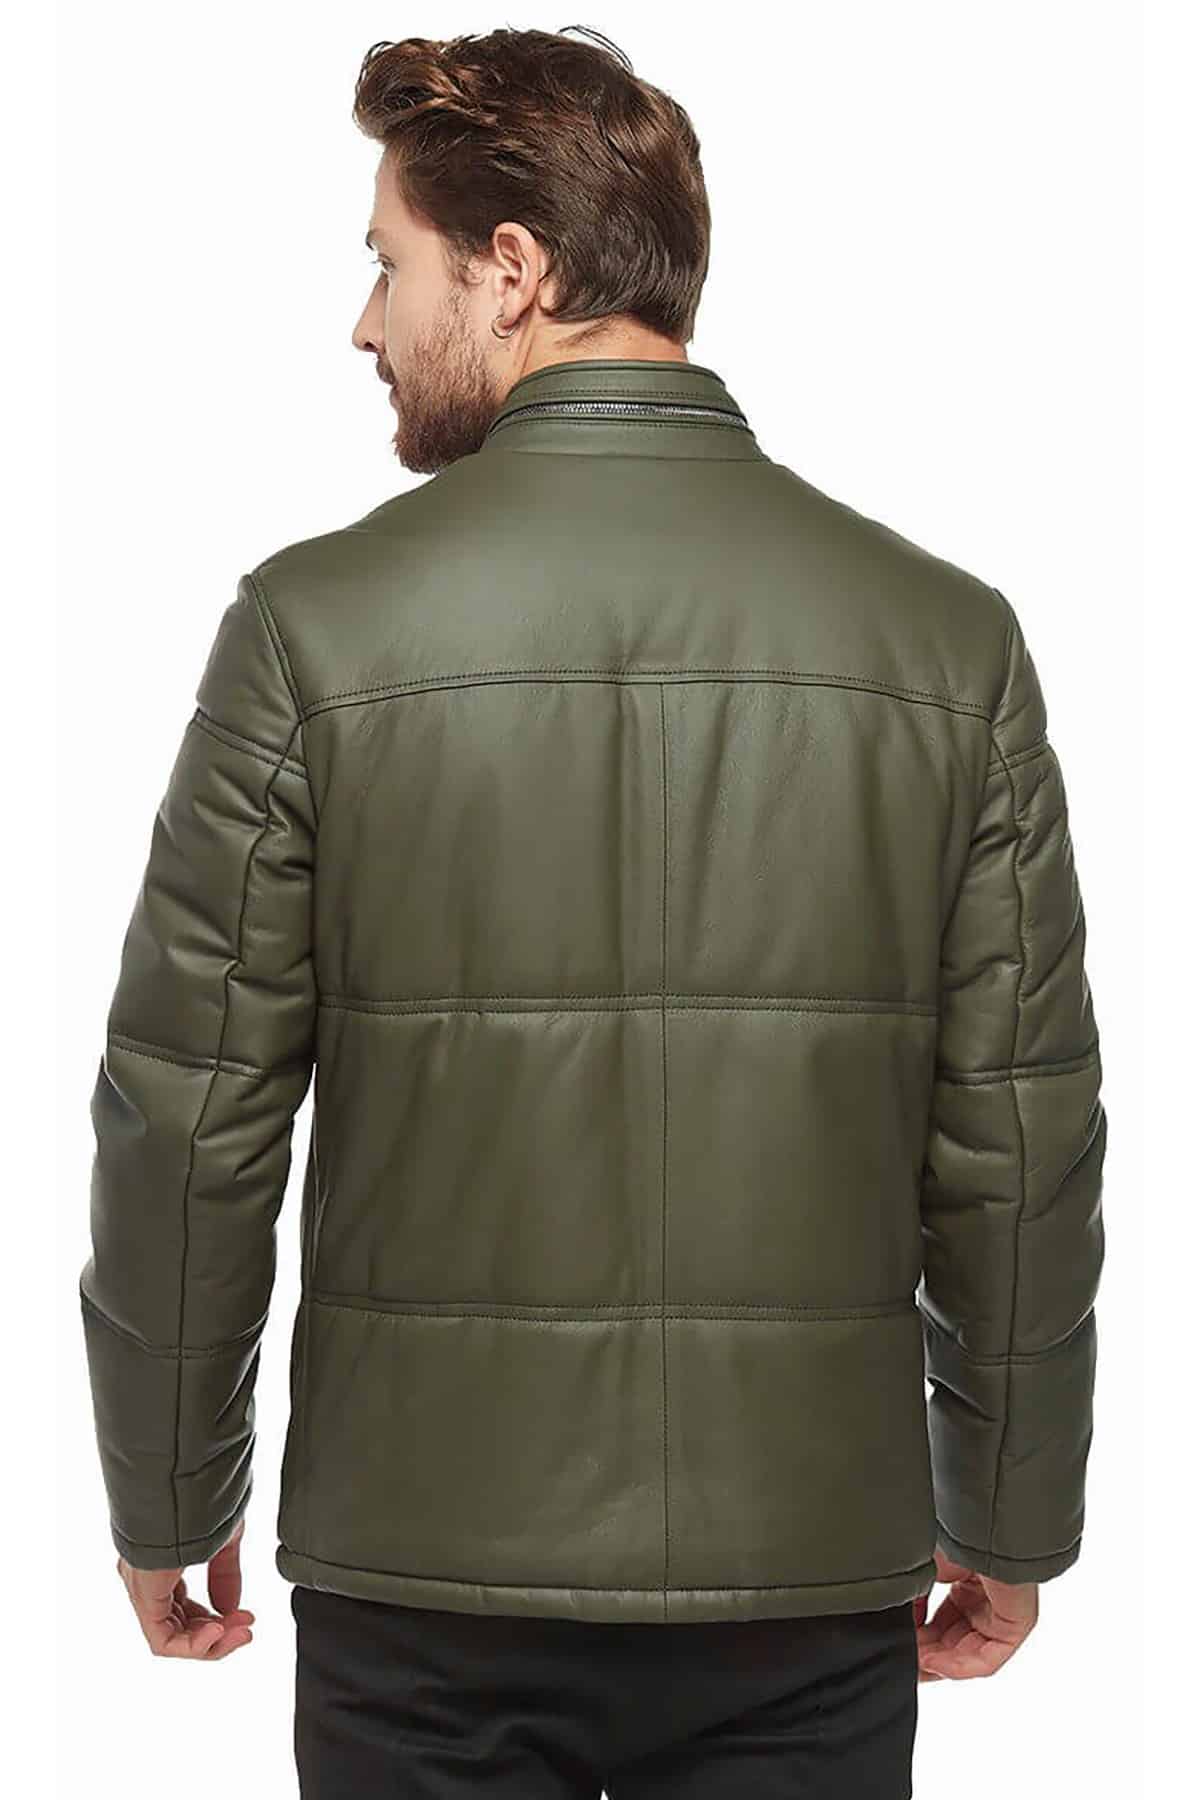 Men’s Green Inflatable Leather Jacket2